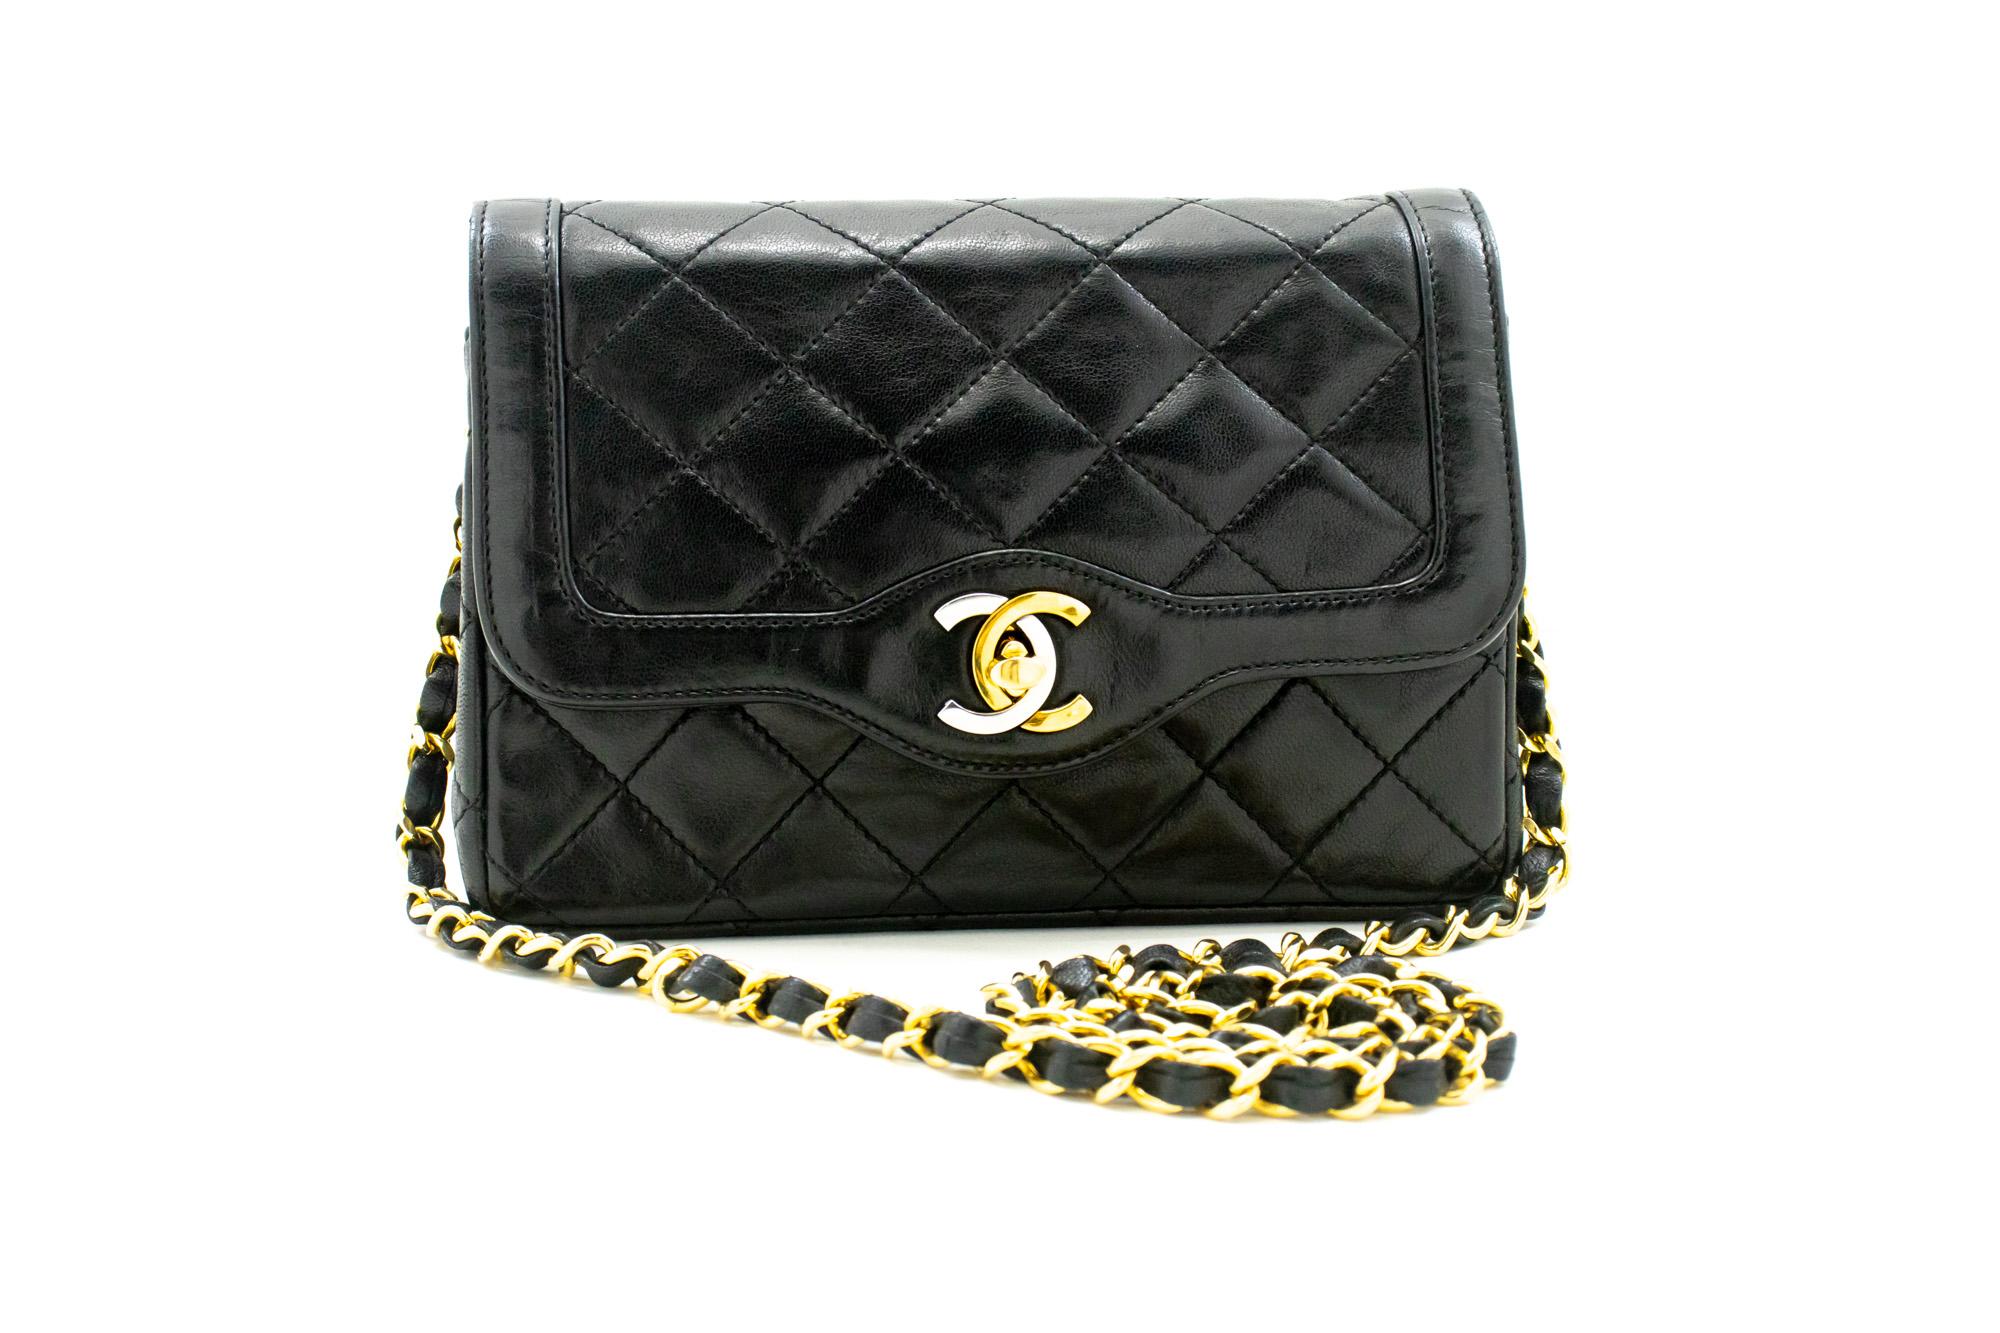 An authentic CHANEL Paris Limited Small Chain Shoulder Bag Black Quilted Flap. The color is Black. The outside material is Leather. The pattern is Solid. This item is Vintage / Classic. The year of manufacture would be 1986-1988.
Conditions &